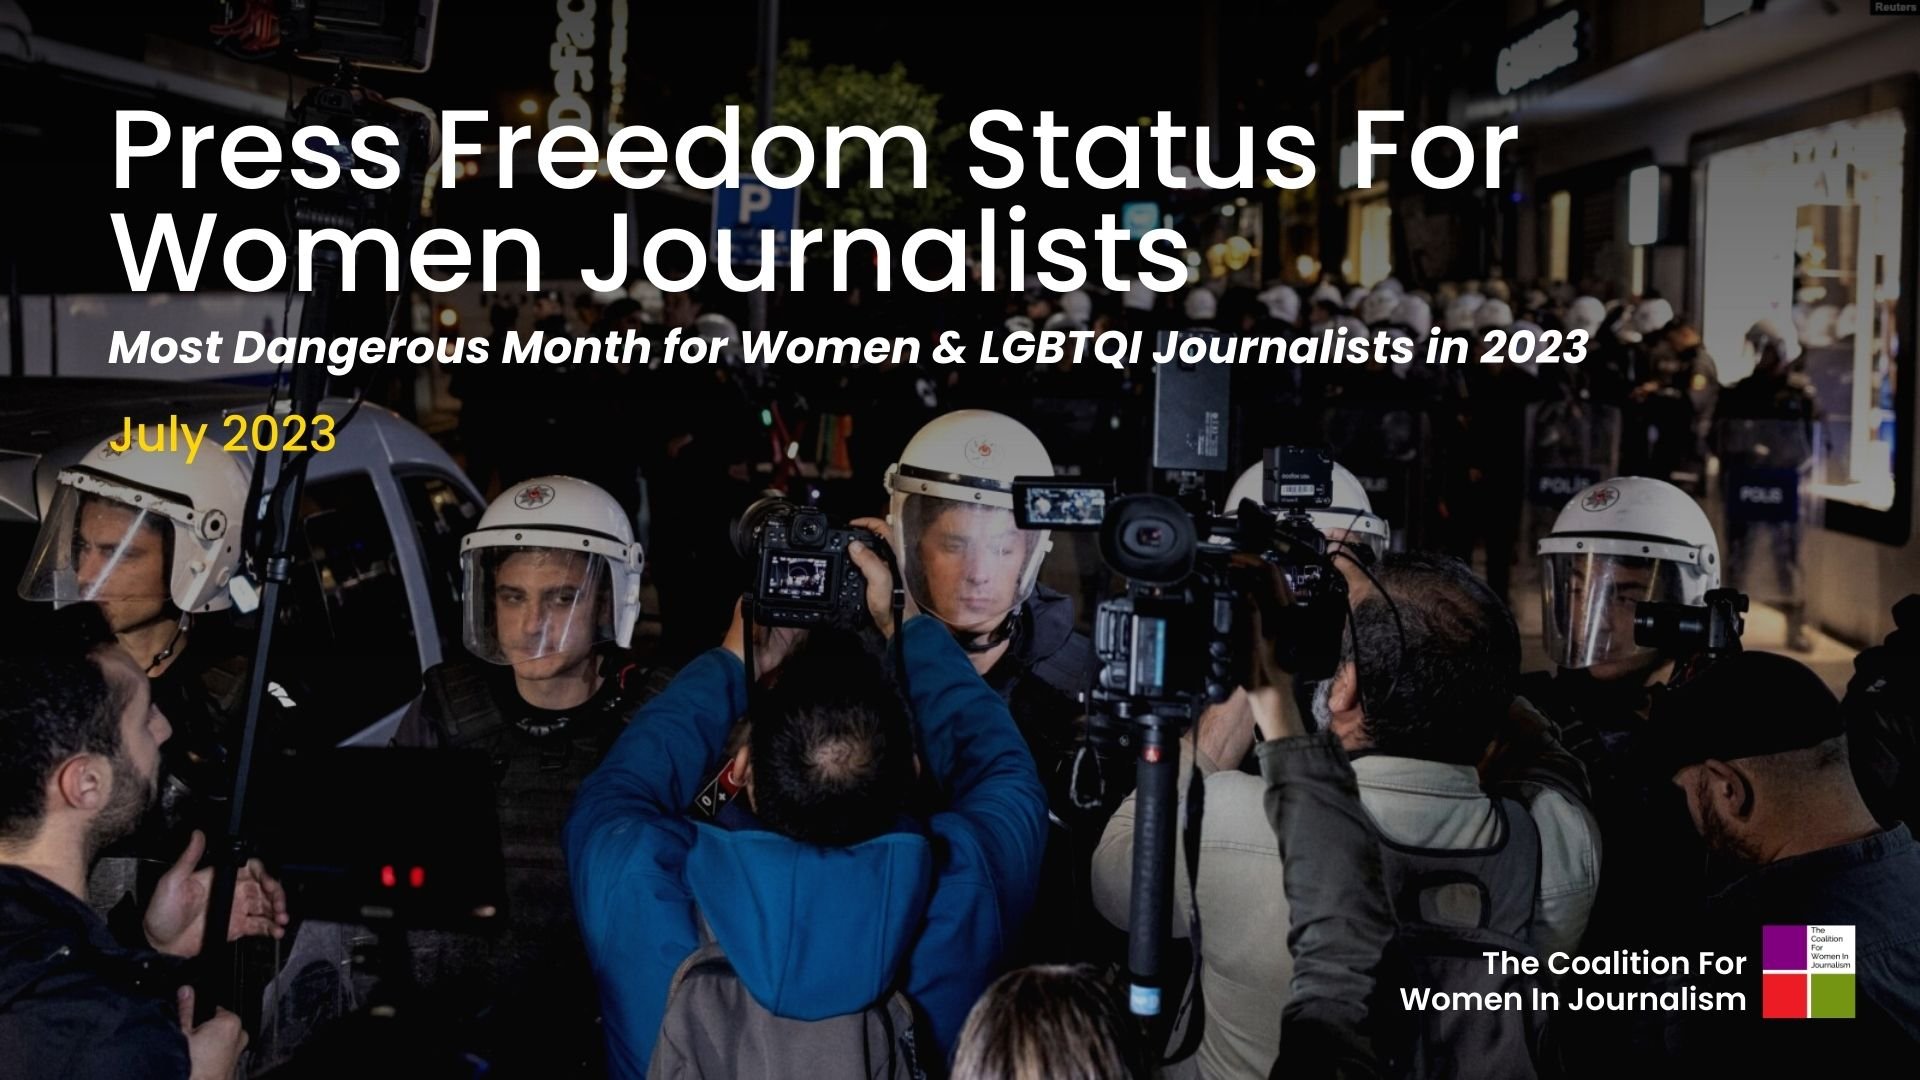 Press Freedom Status For Women Journalists July 2023 — Coalition For Women in Journalism pic photo